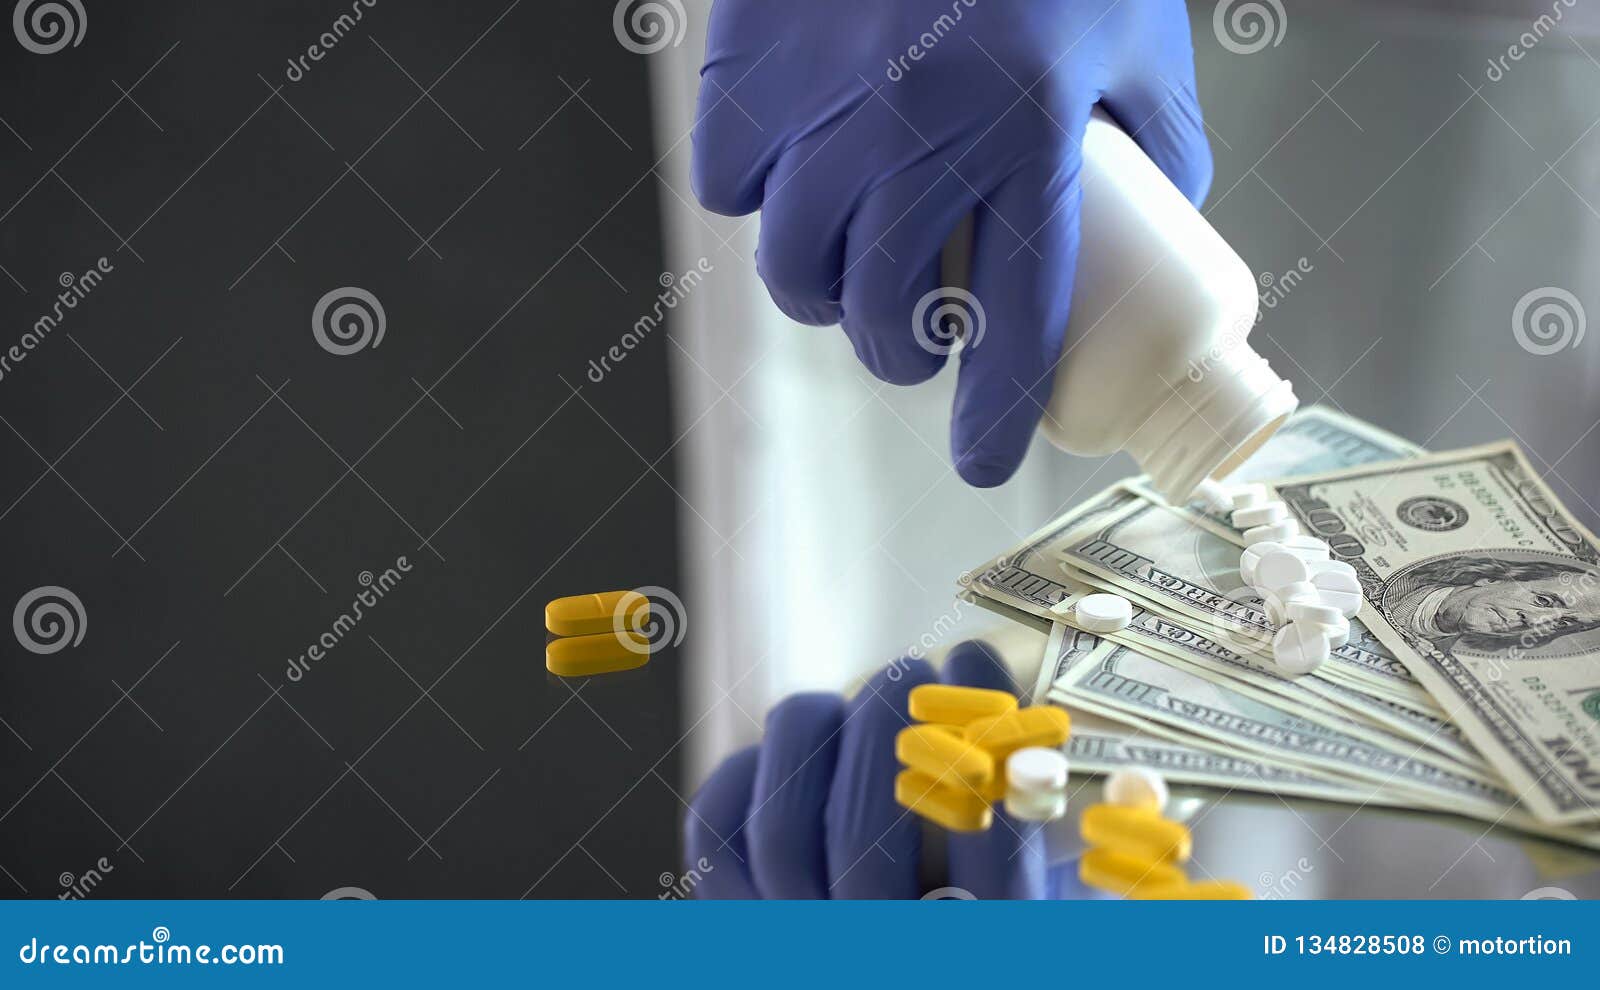 pharmacist dropping tablets on dollars, pharmaceutical business, expensive drugs